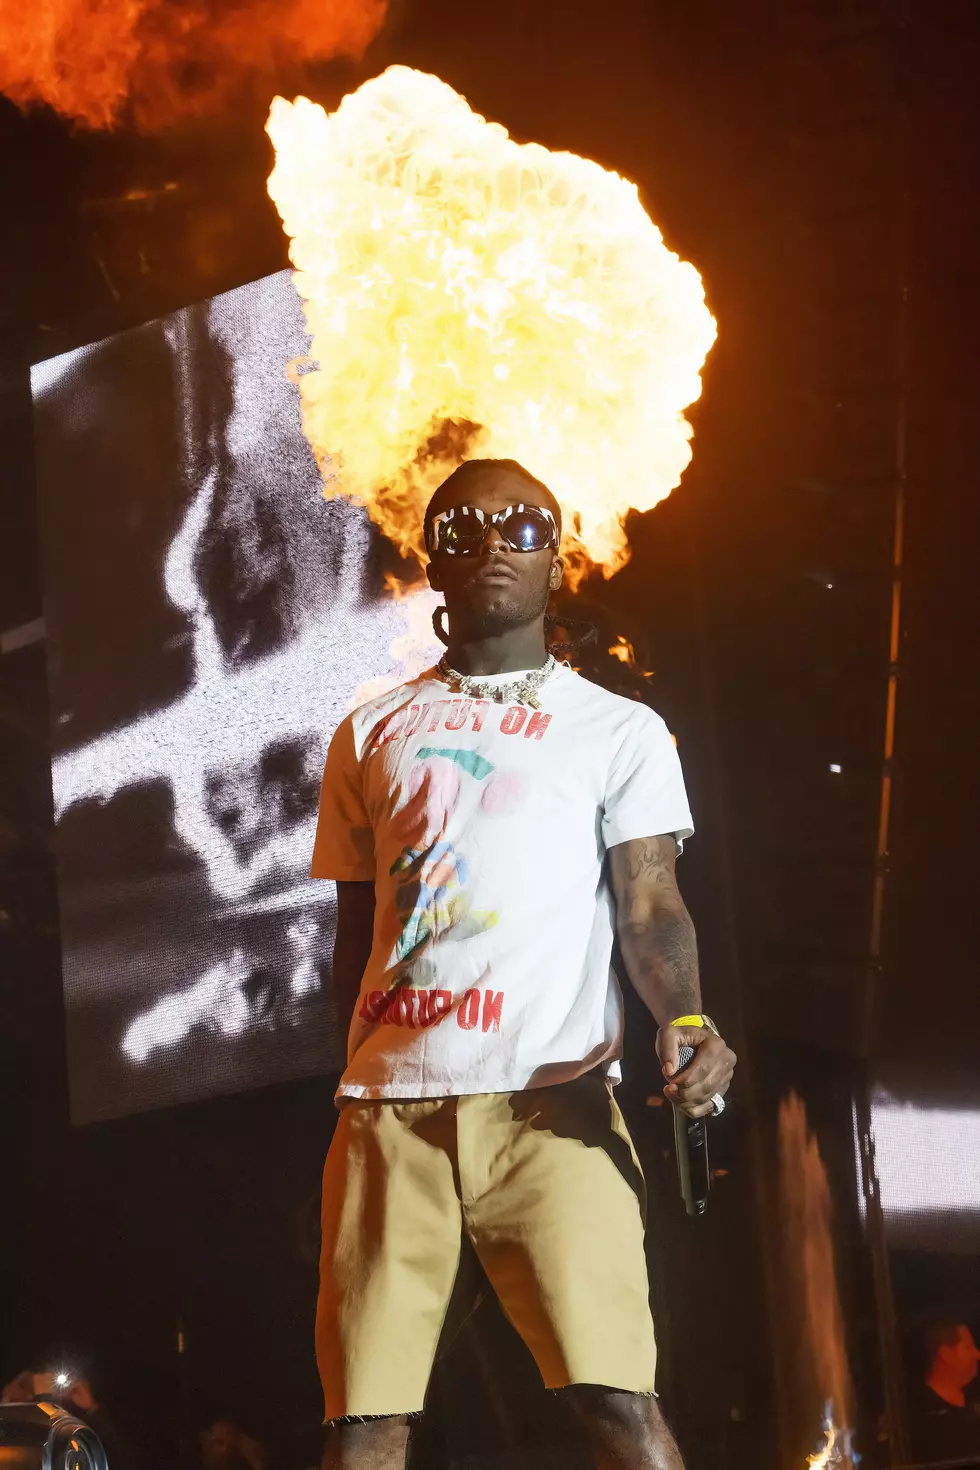 Lil Uzi Vert performs during Rolling Loud NYC at Citi Field on September 23, 2022 in New York City.